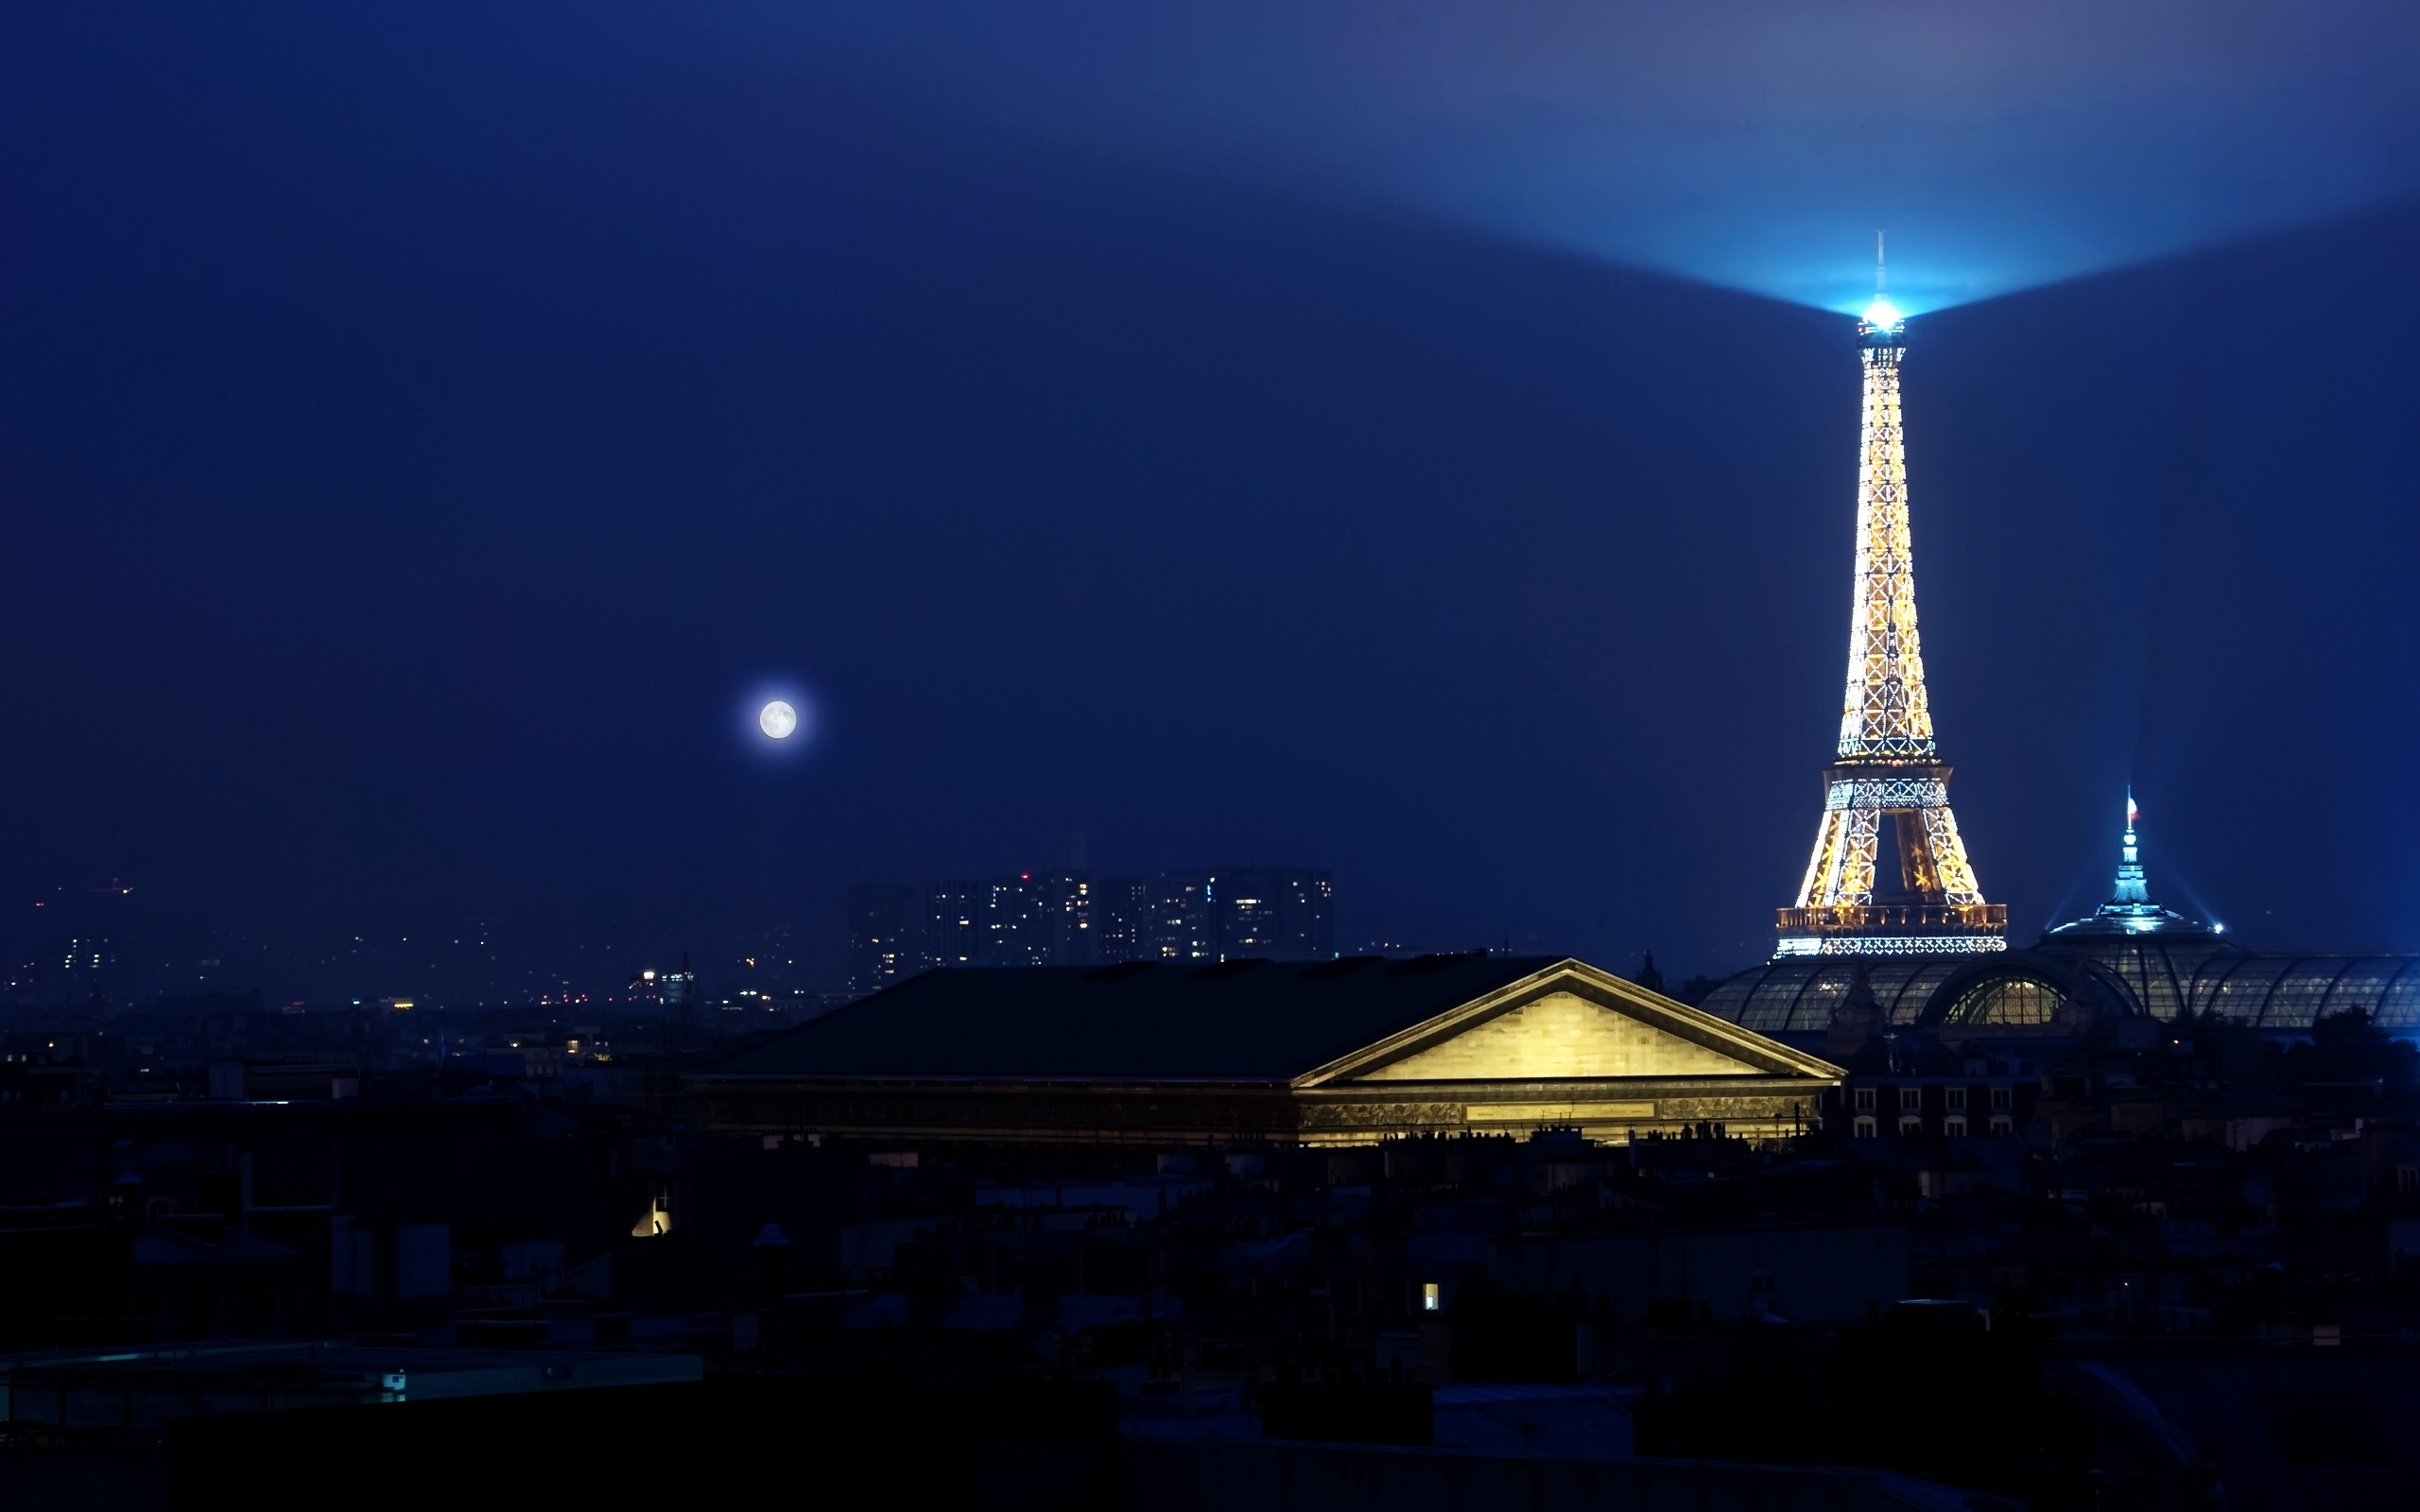 Eiffel Tower illuminated at night, a stunning monument in Paris, France.